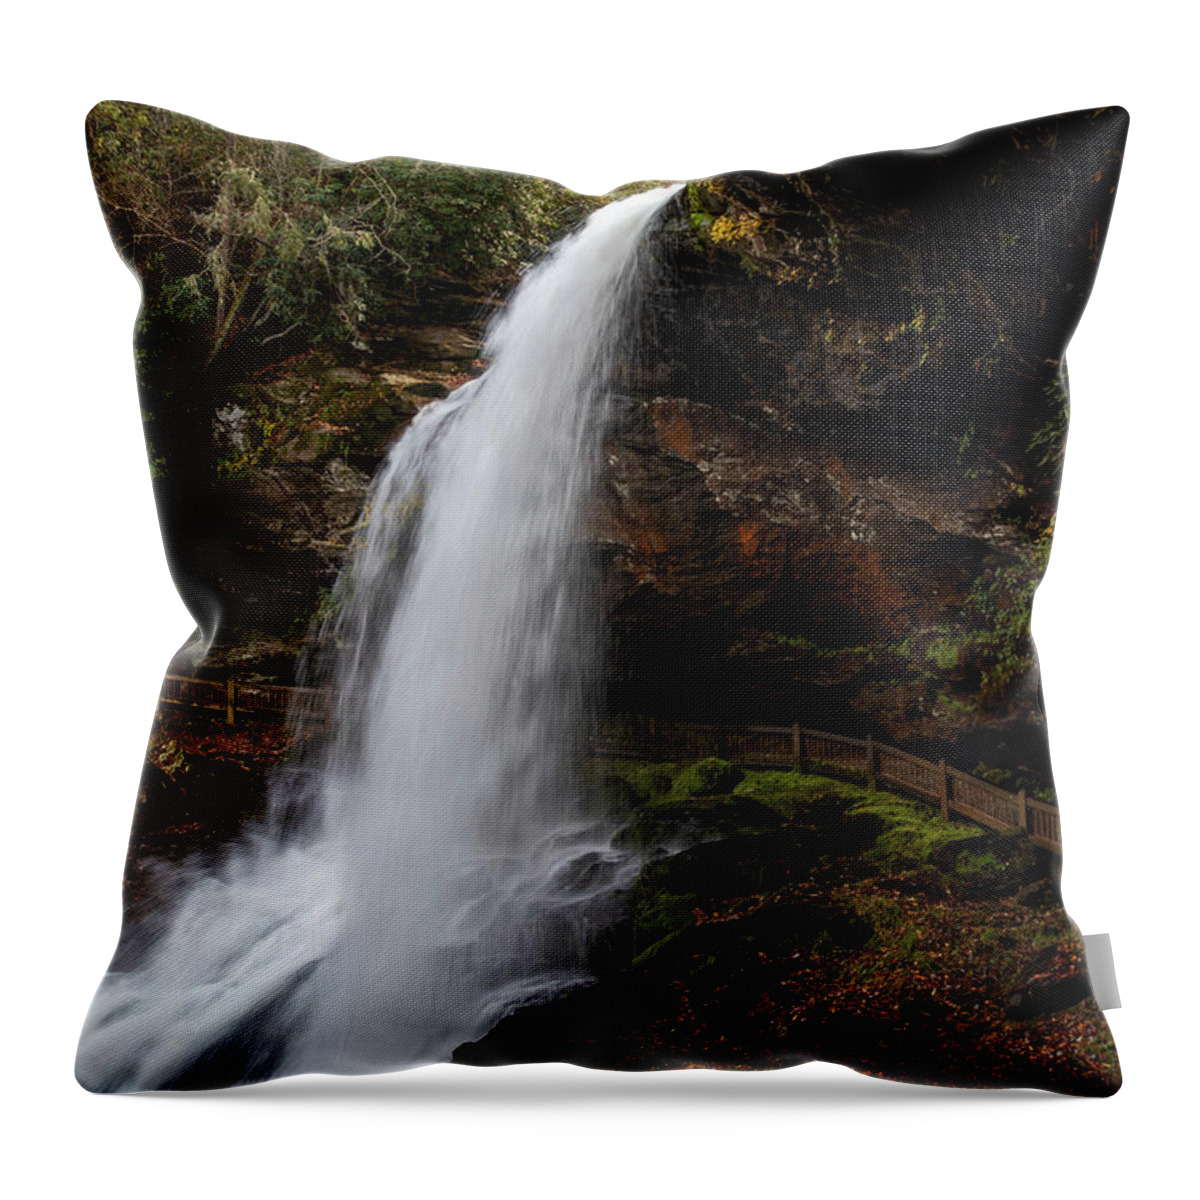 Dry Falls Walkway Throw Pillow featuring the photograph Dry Falls North Carolina by Dan Sproul